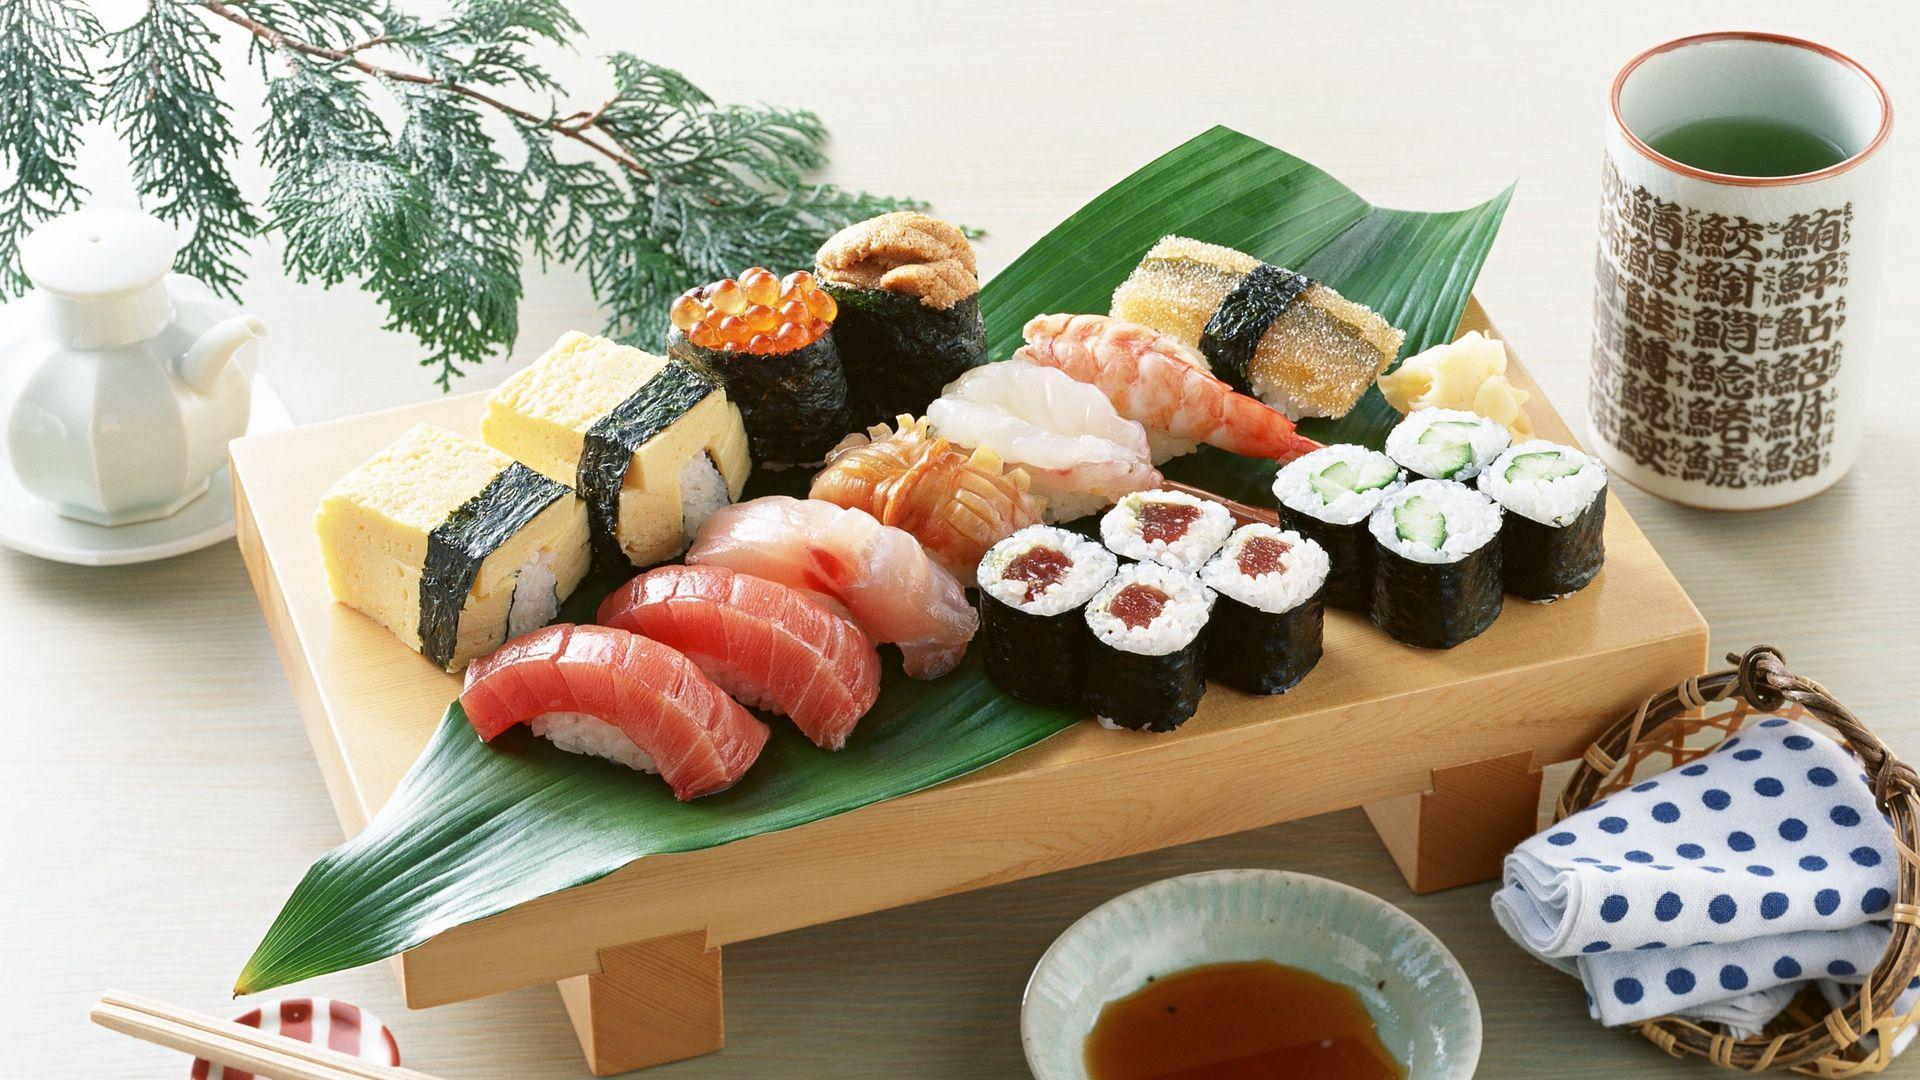 Download wallpaper 1920x1080 rolls, sushi, seafood, plate, food